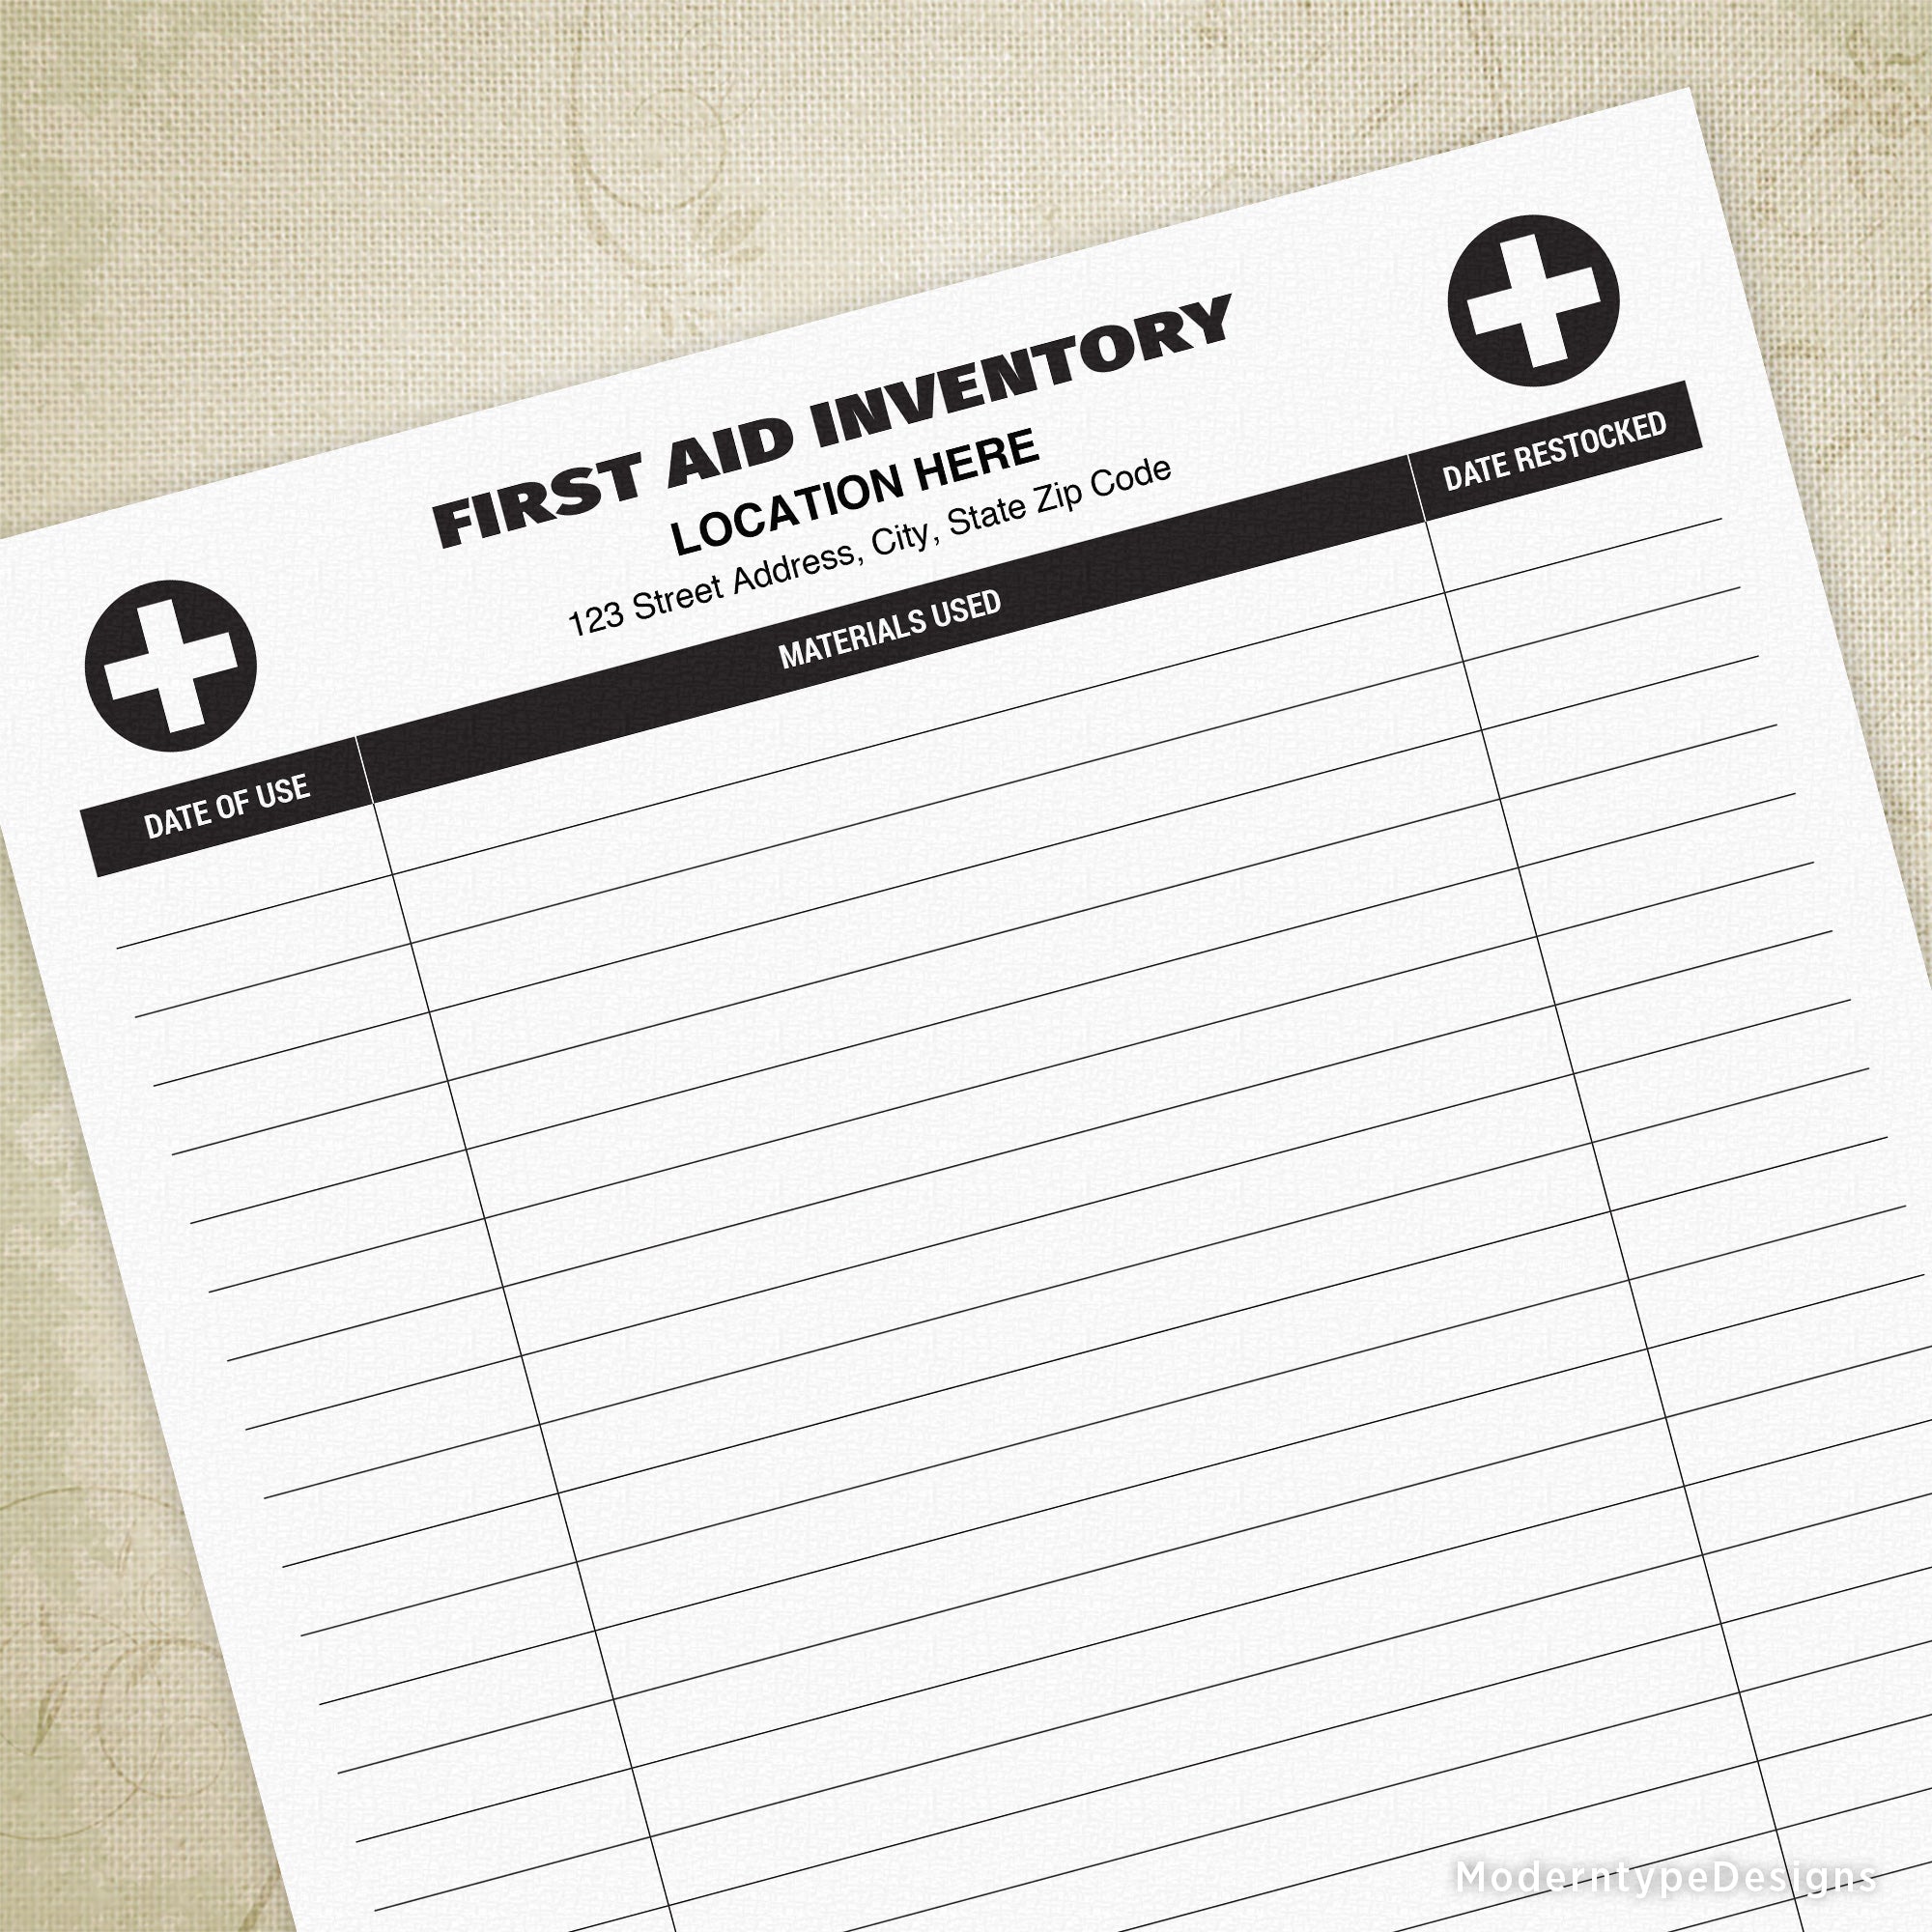 First Aid Inventory Log Printable, Personalized